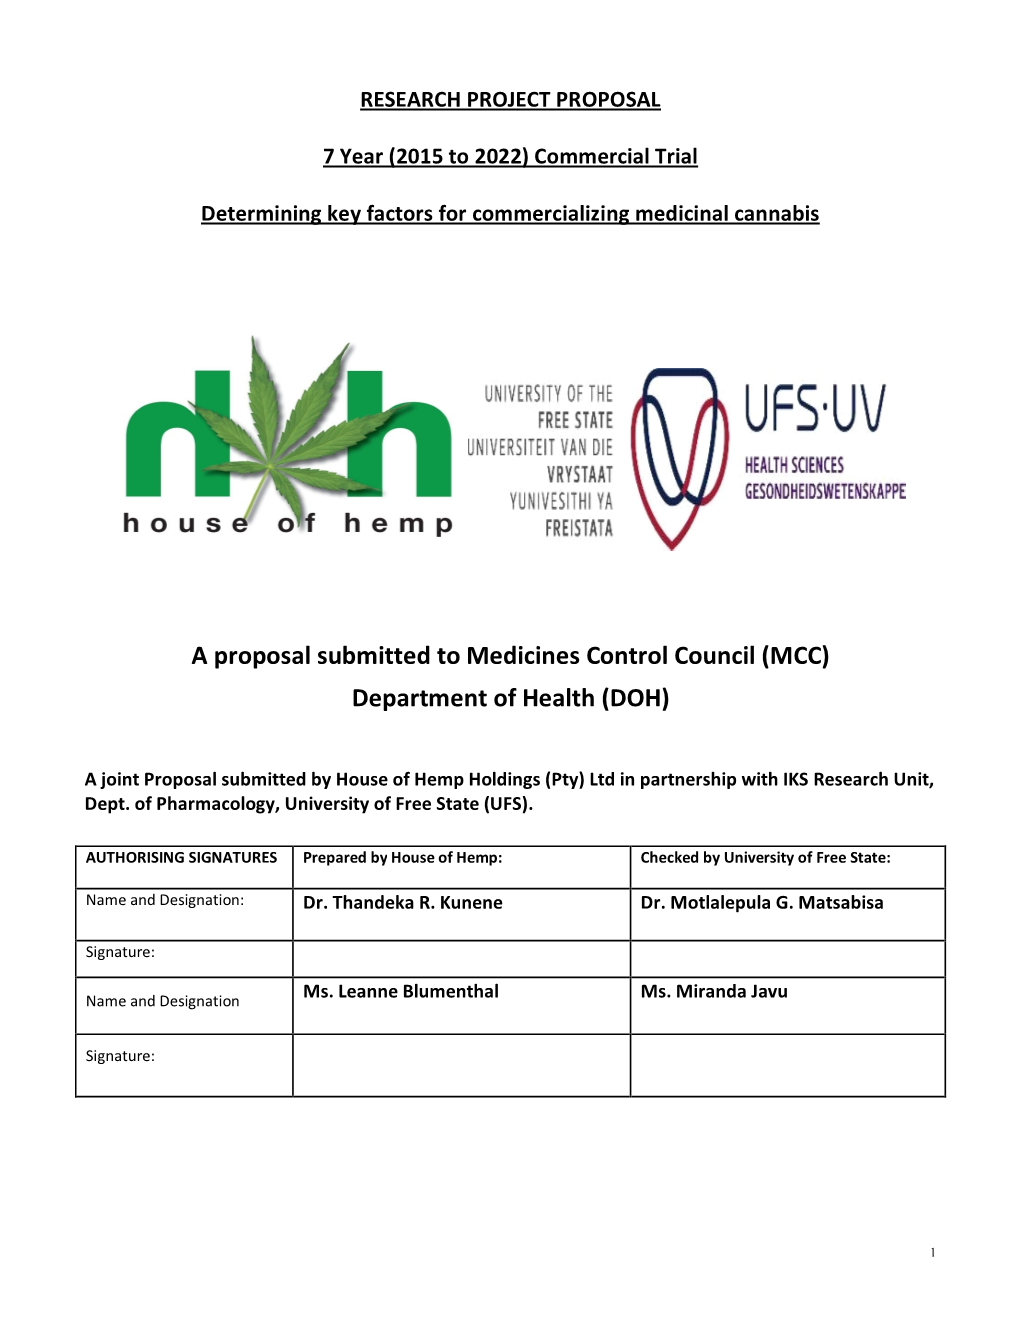 A Proposal Submitted to Medicines Control Council (MCC) Department of Health (DOH)